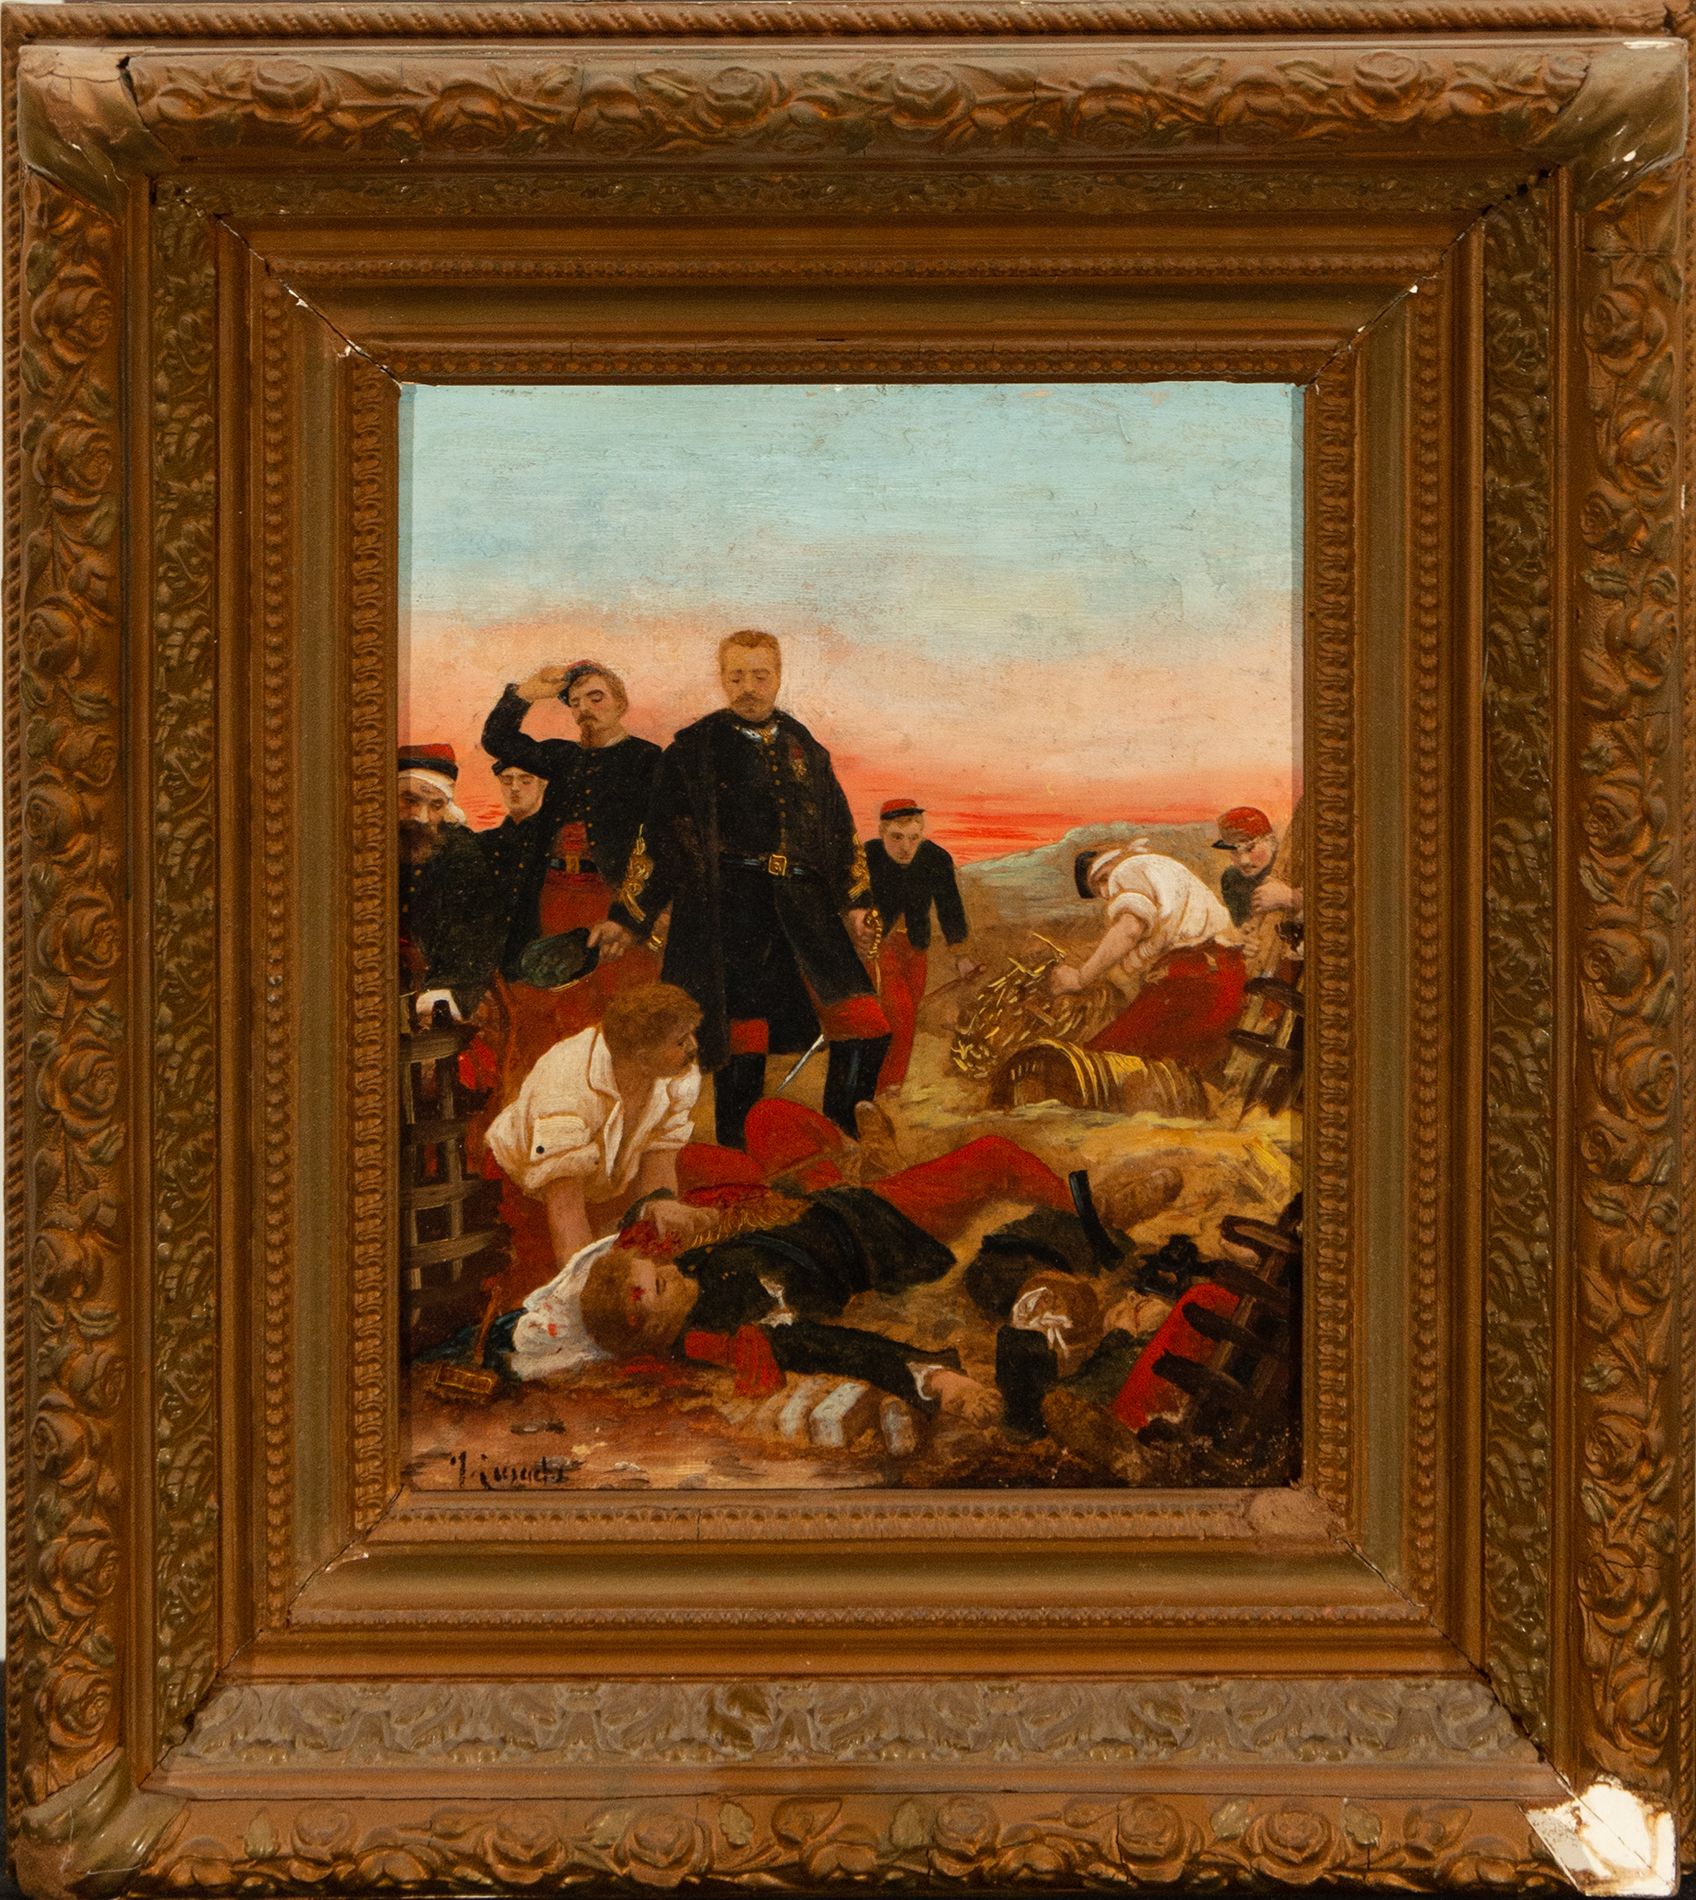 Tribute to the fallen French Officer in the Franco - Prussian War of 1870, Frenc&hellip;